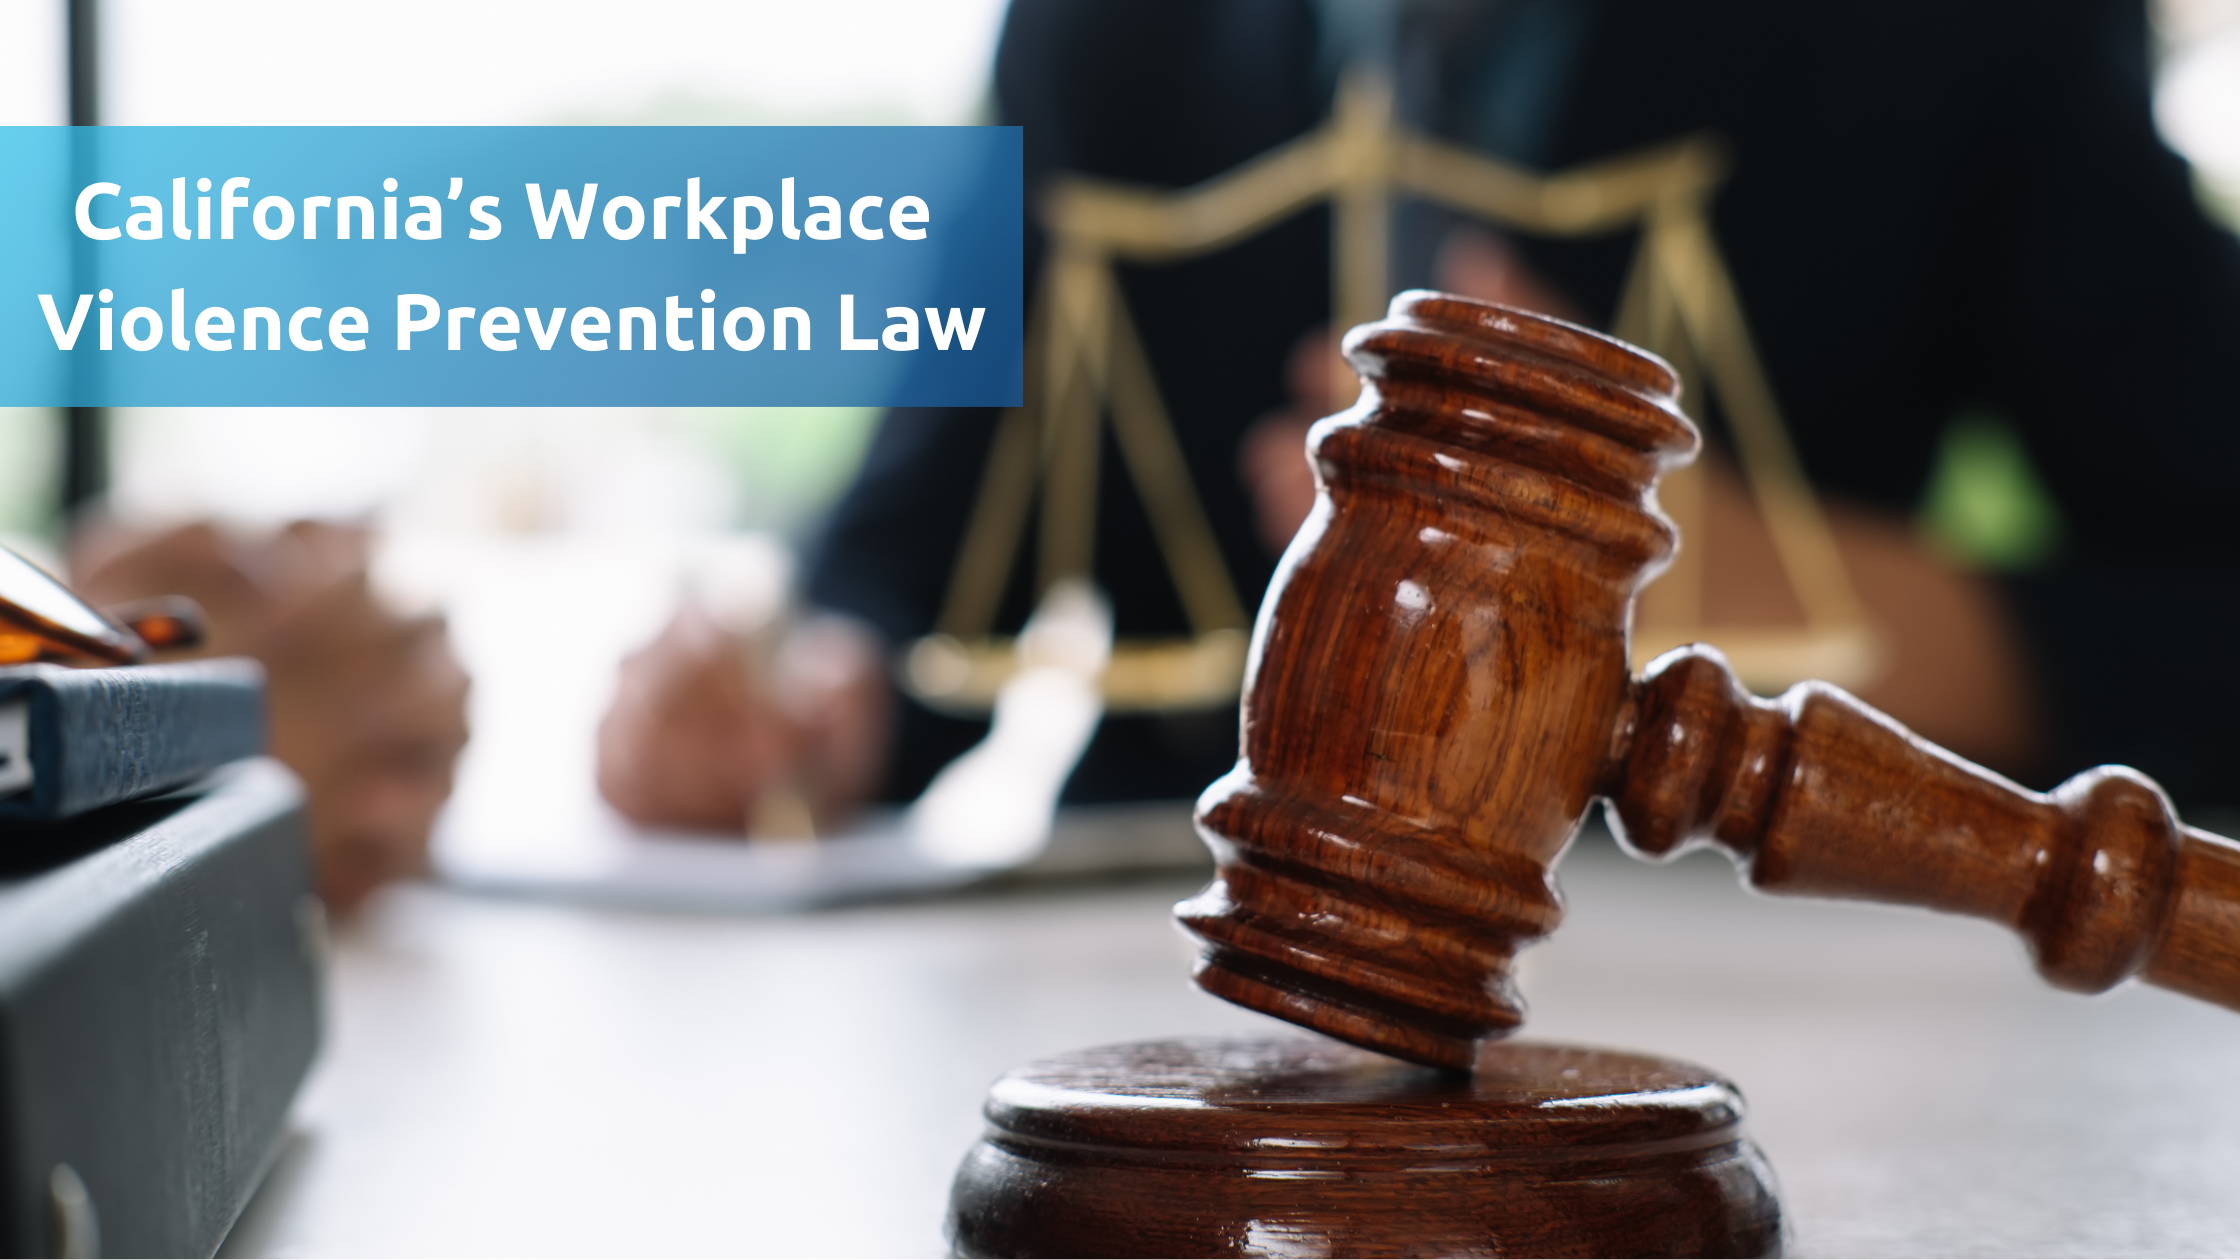 California's Workplace Violence Prevention Law